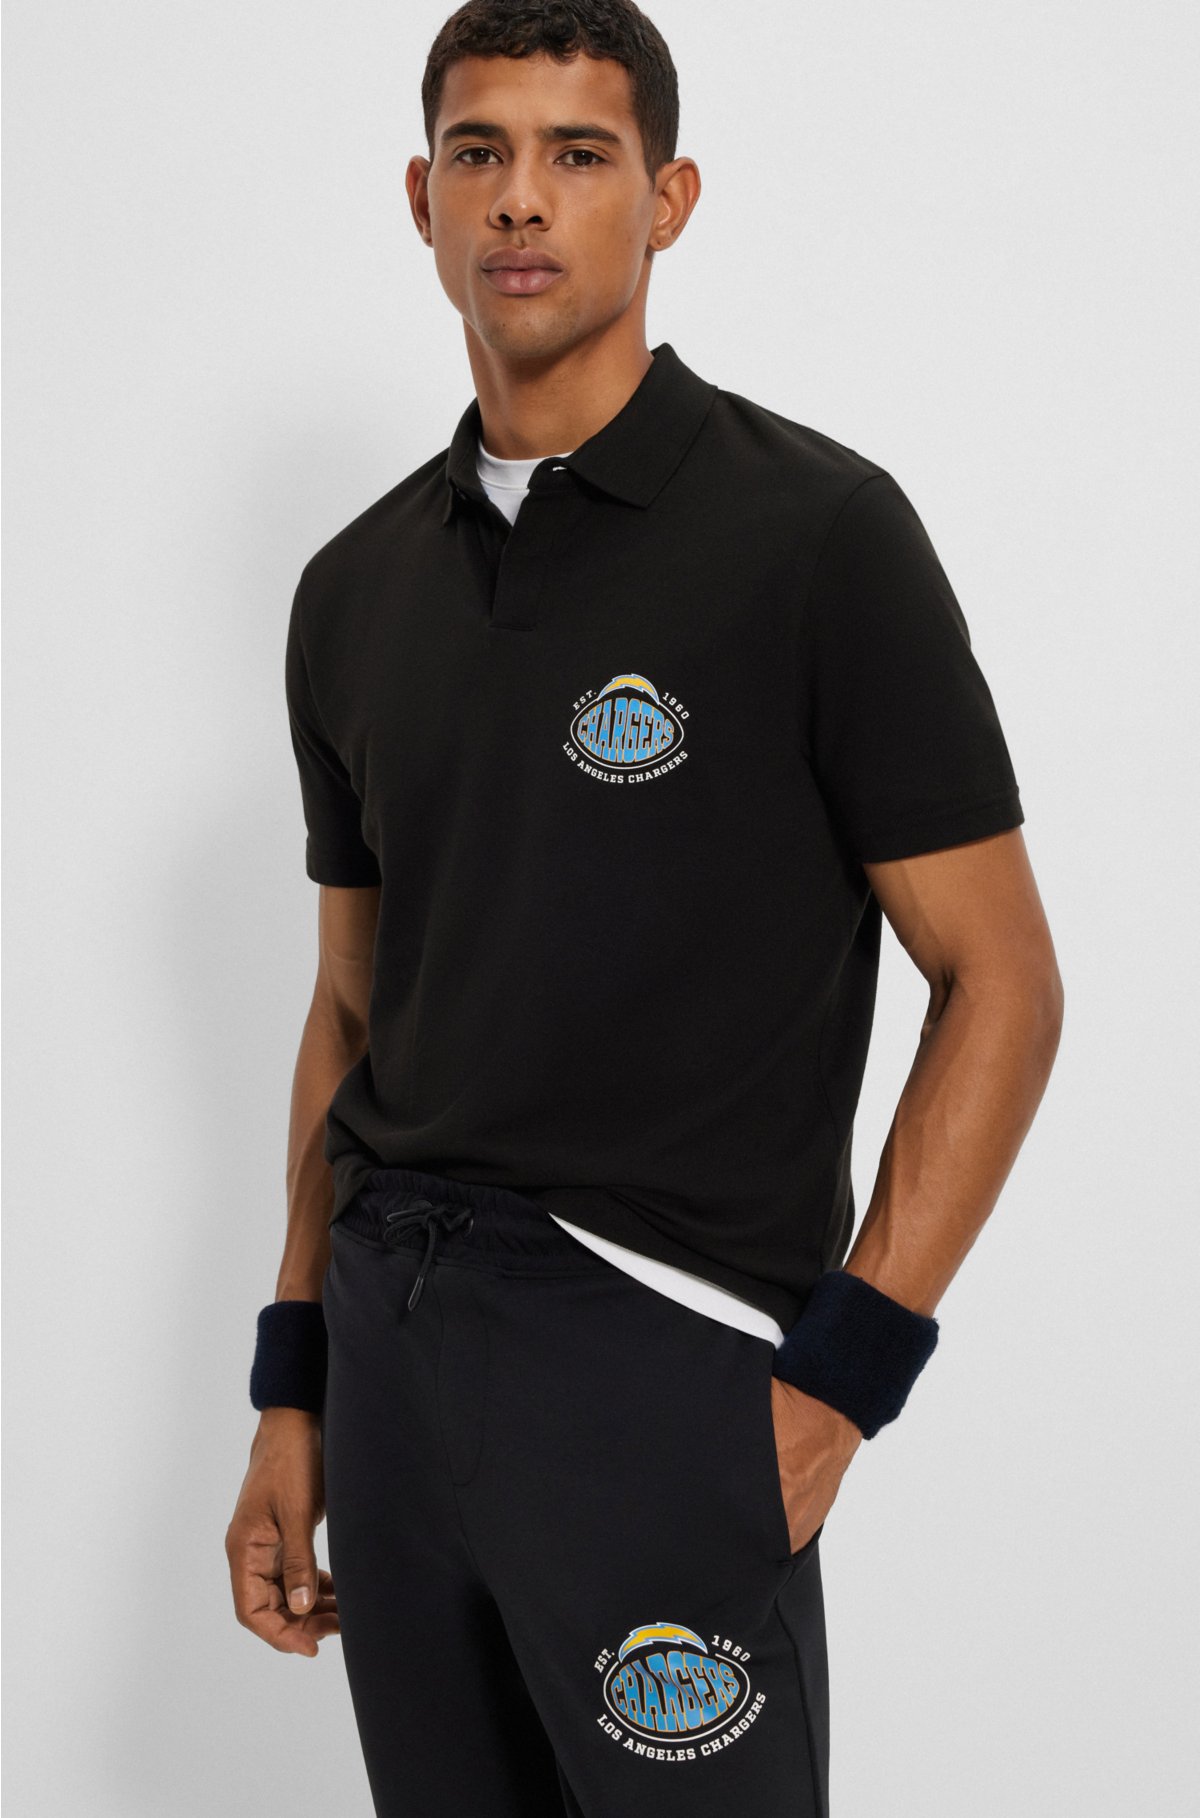 BOSS x NFL cotton-piqué polo shirt with collaborative branding, Chargers